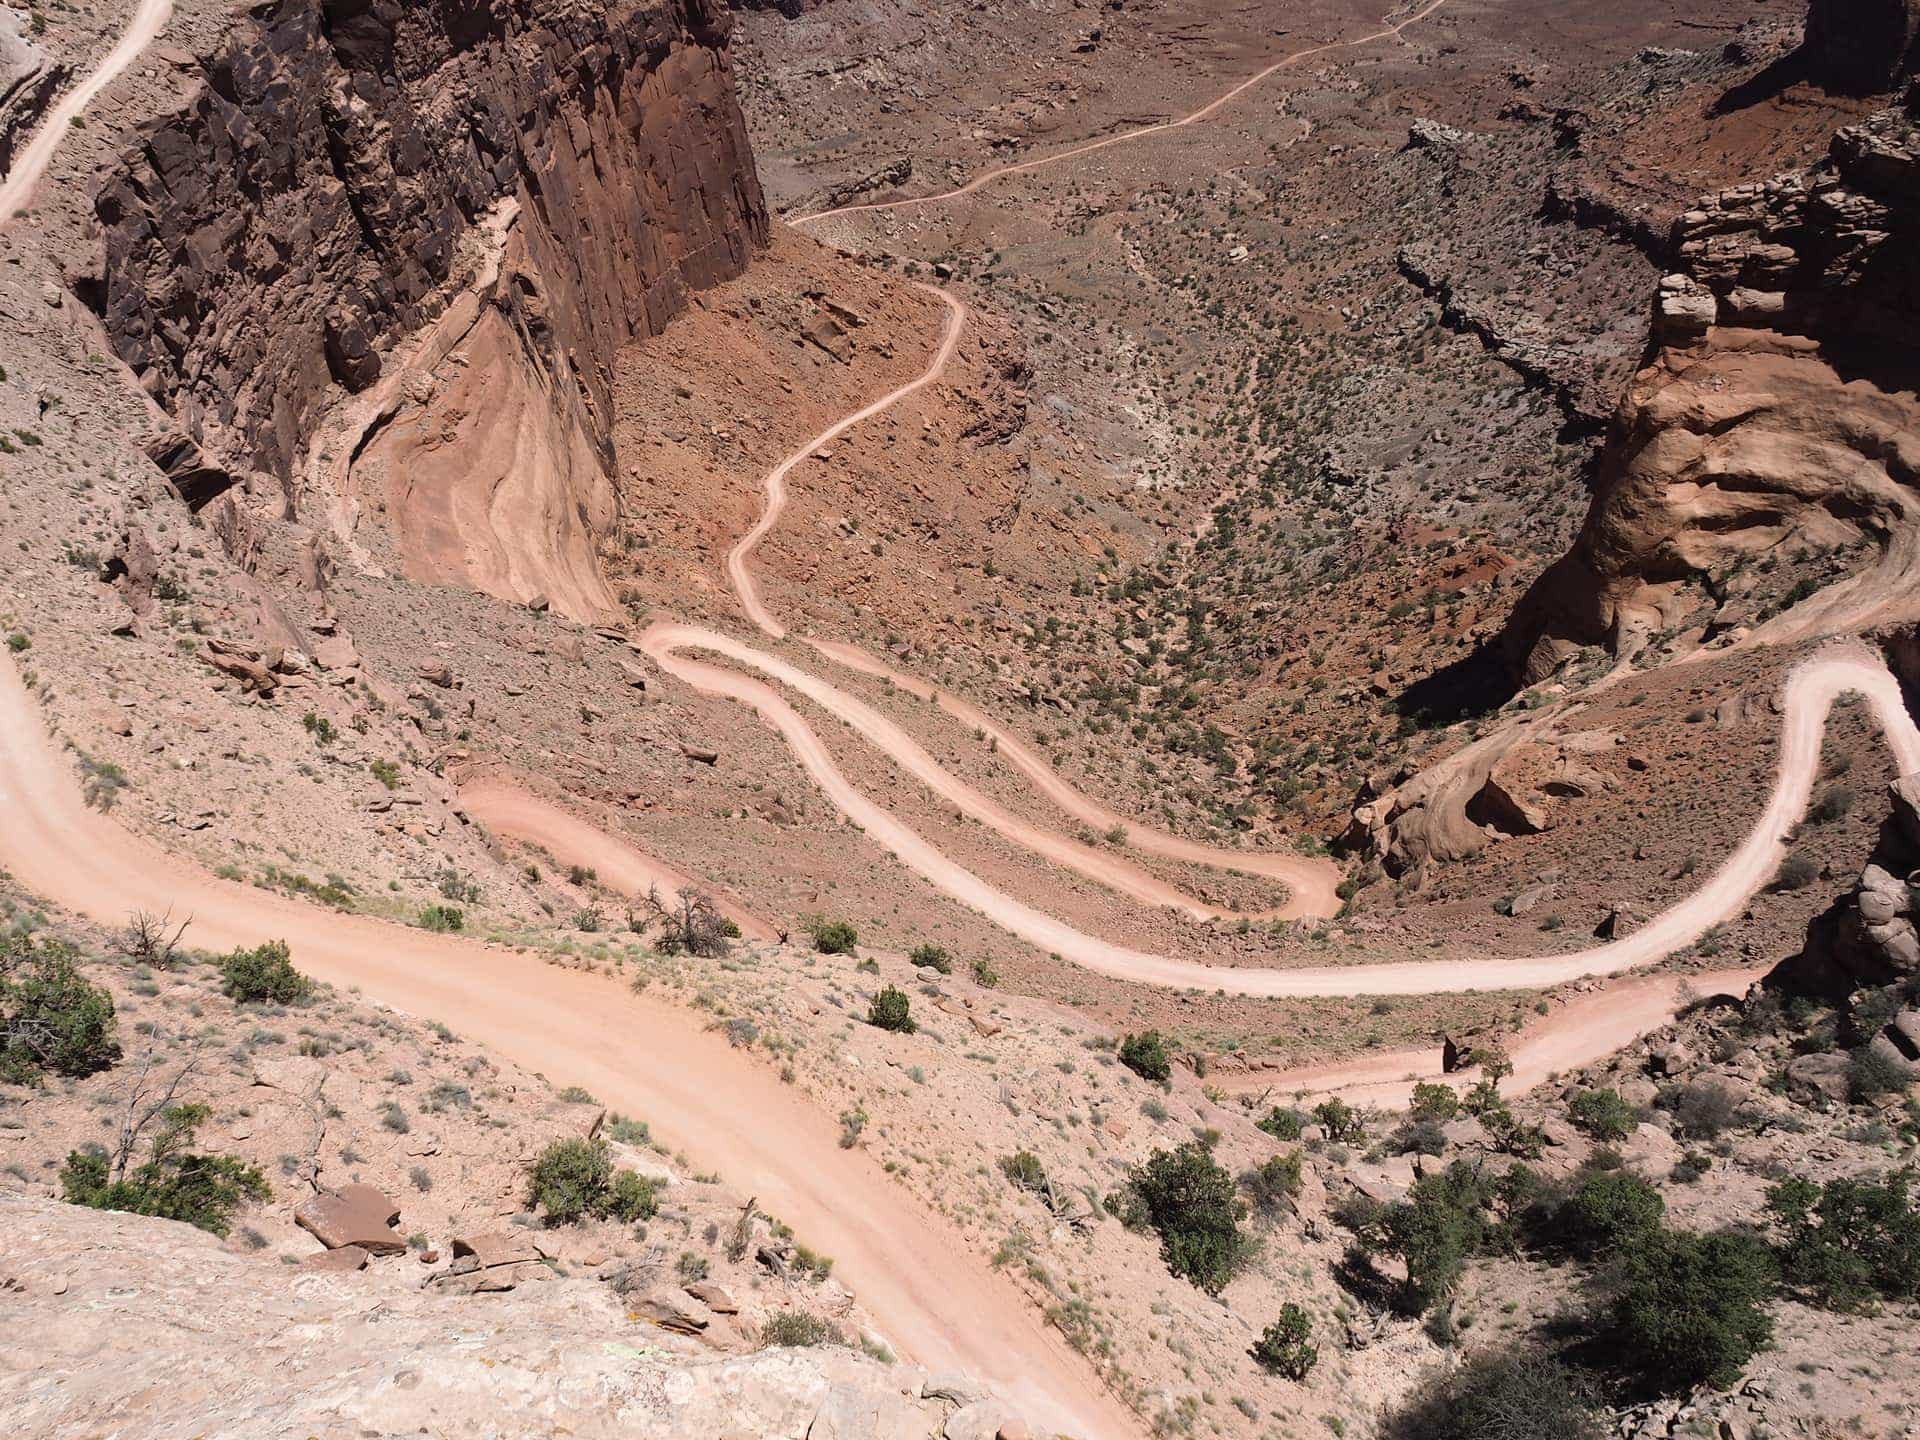 Famous viewpoint looking down over the Shafer Trail switchbacks